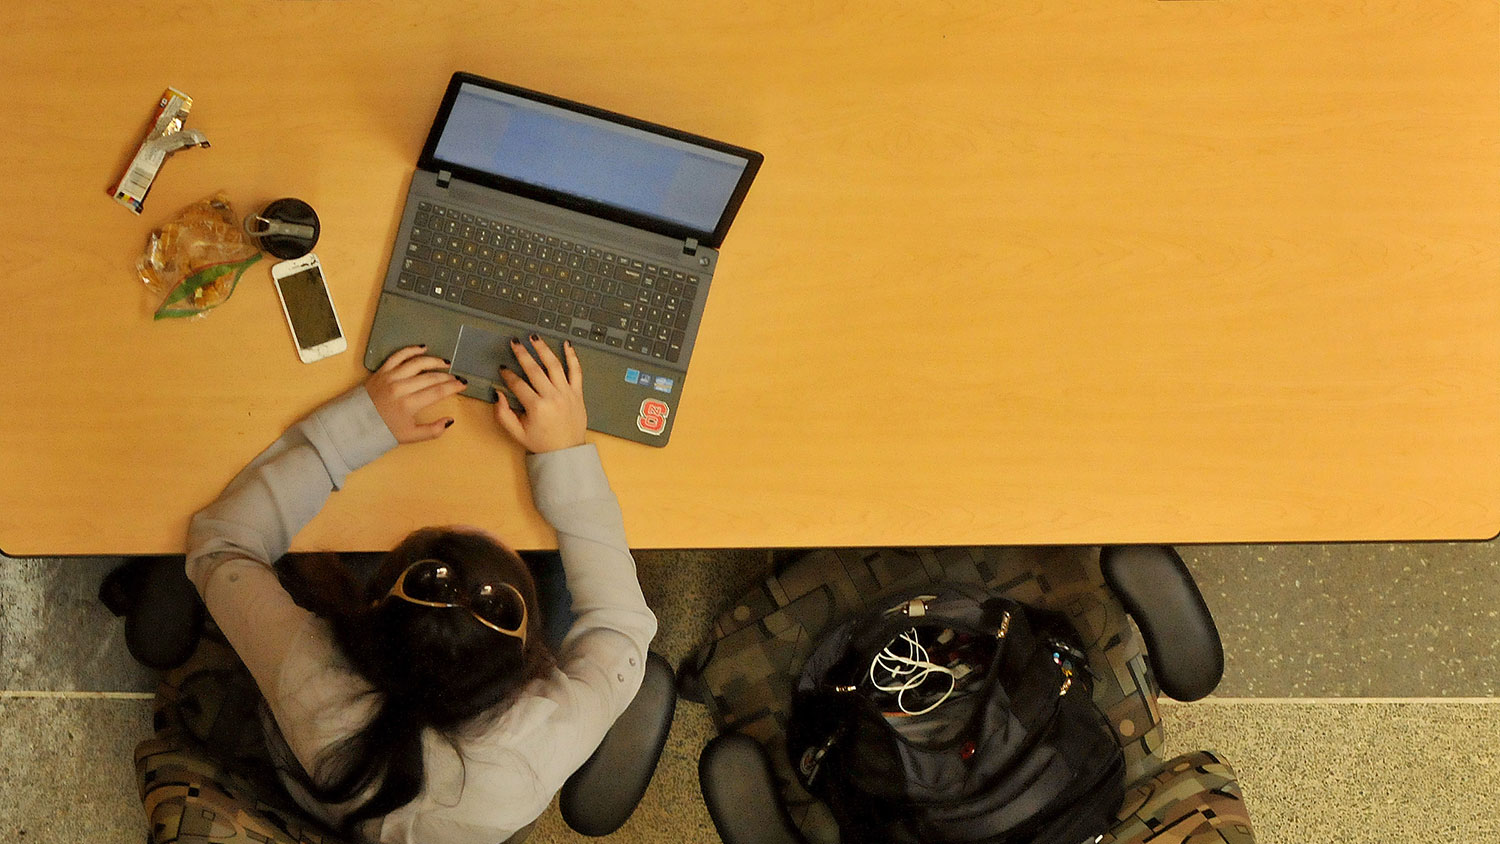 Student works on her laptop in EB1 on Centennial Campus.